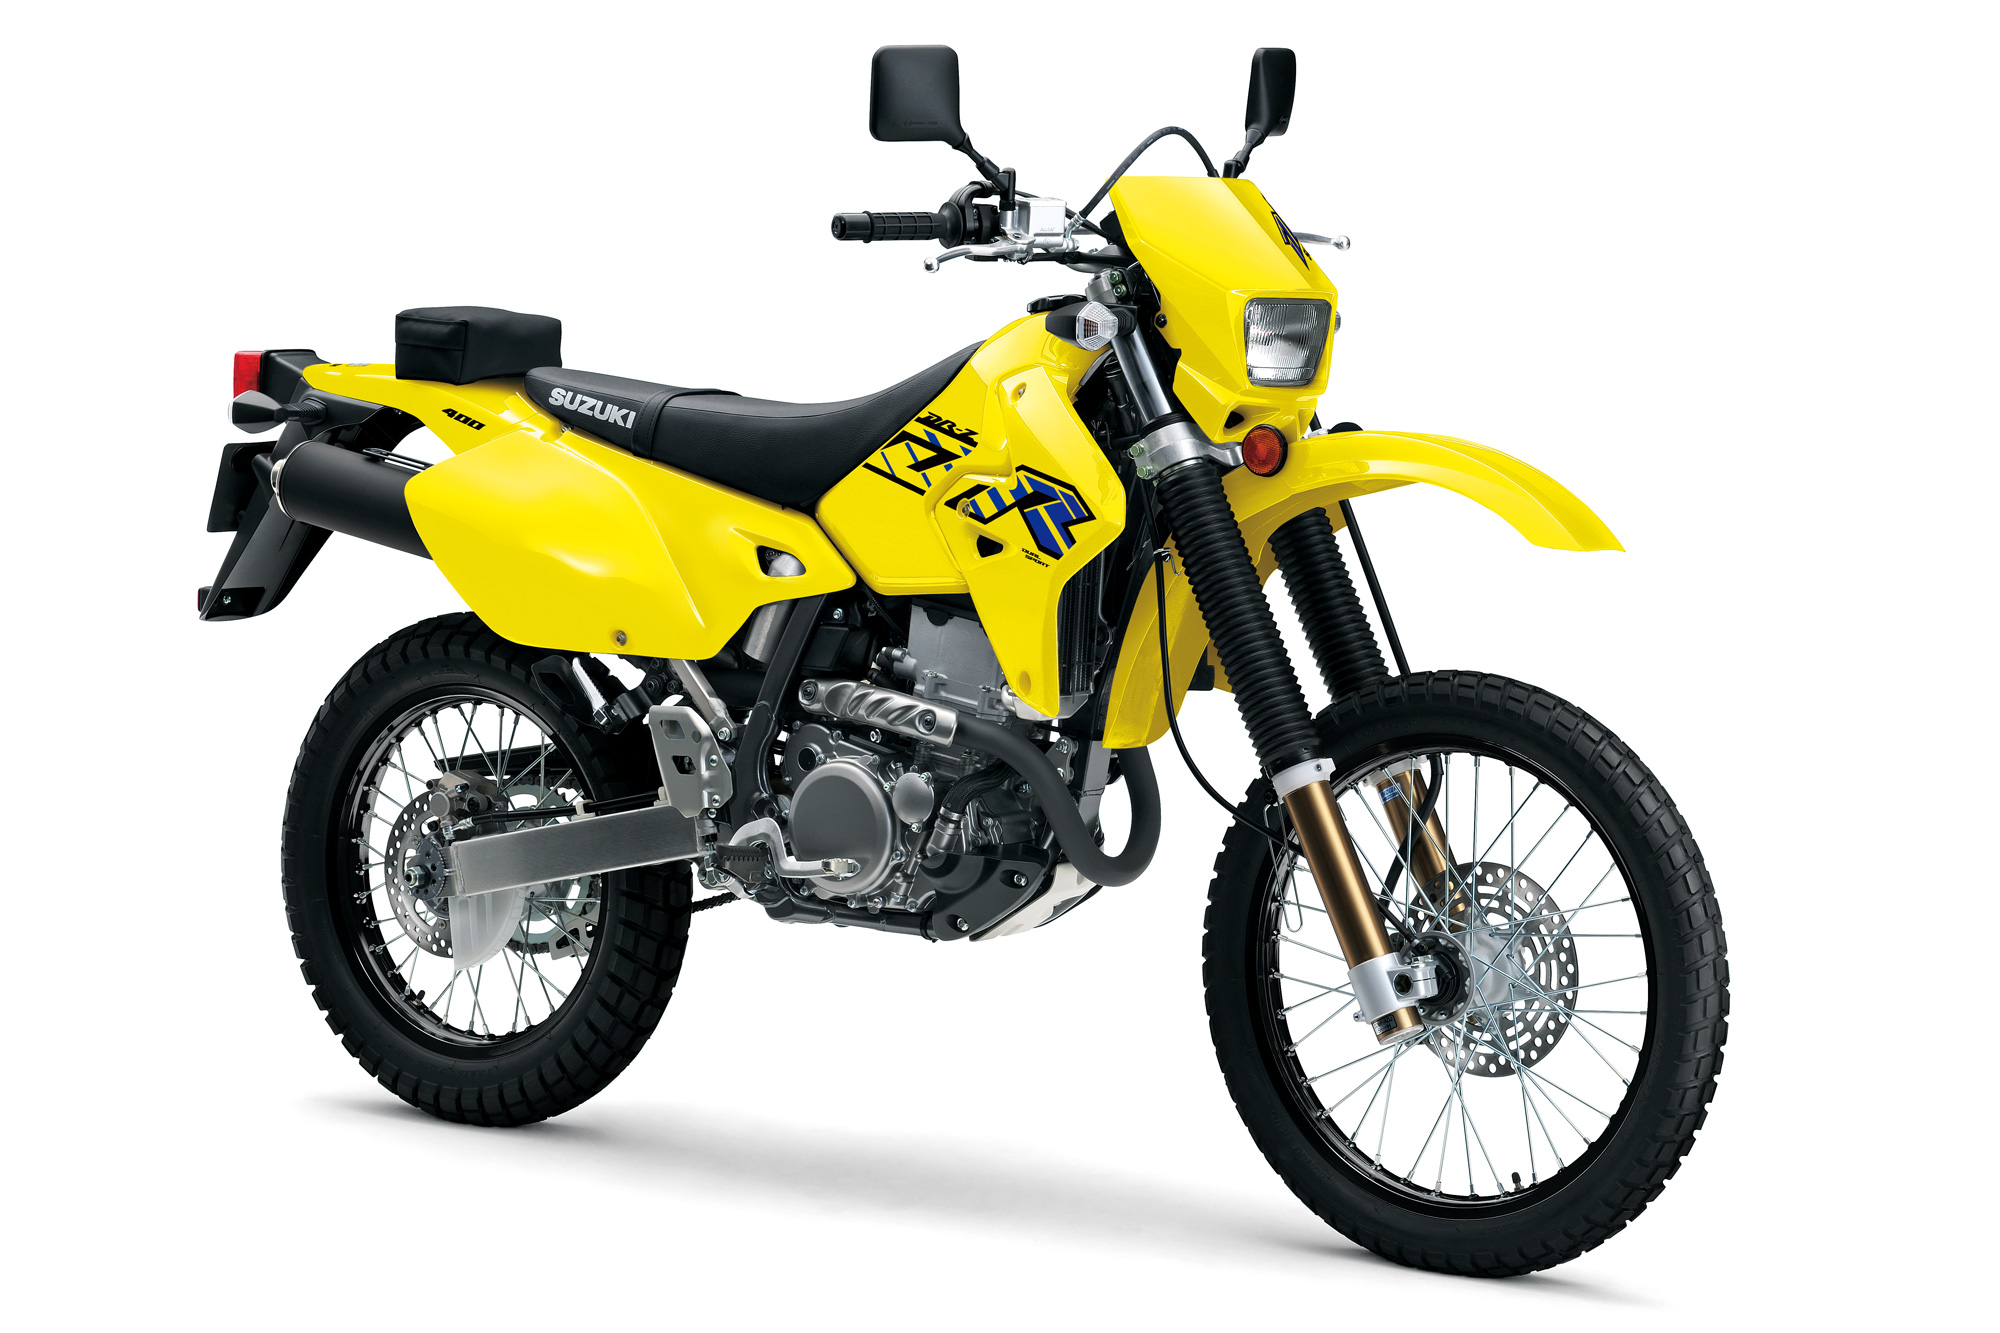 DR-Z400S in yellow